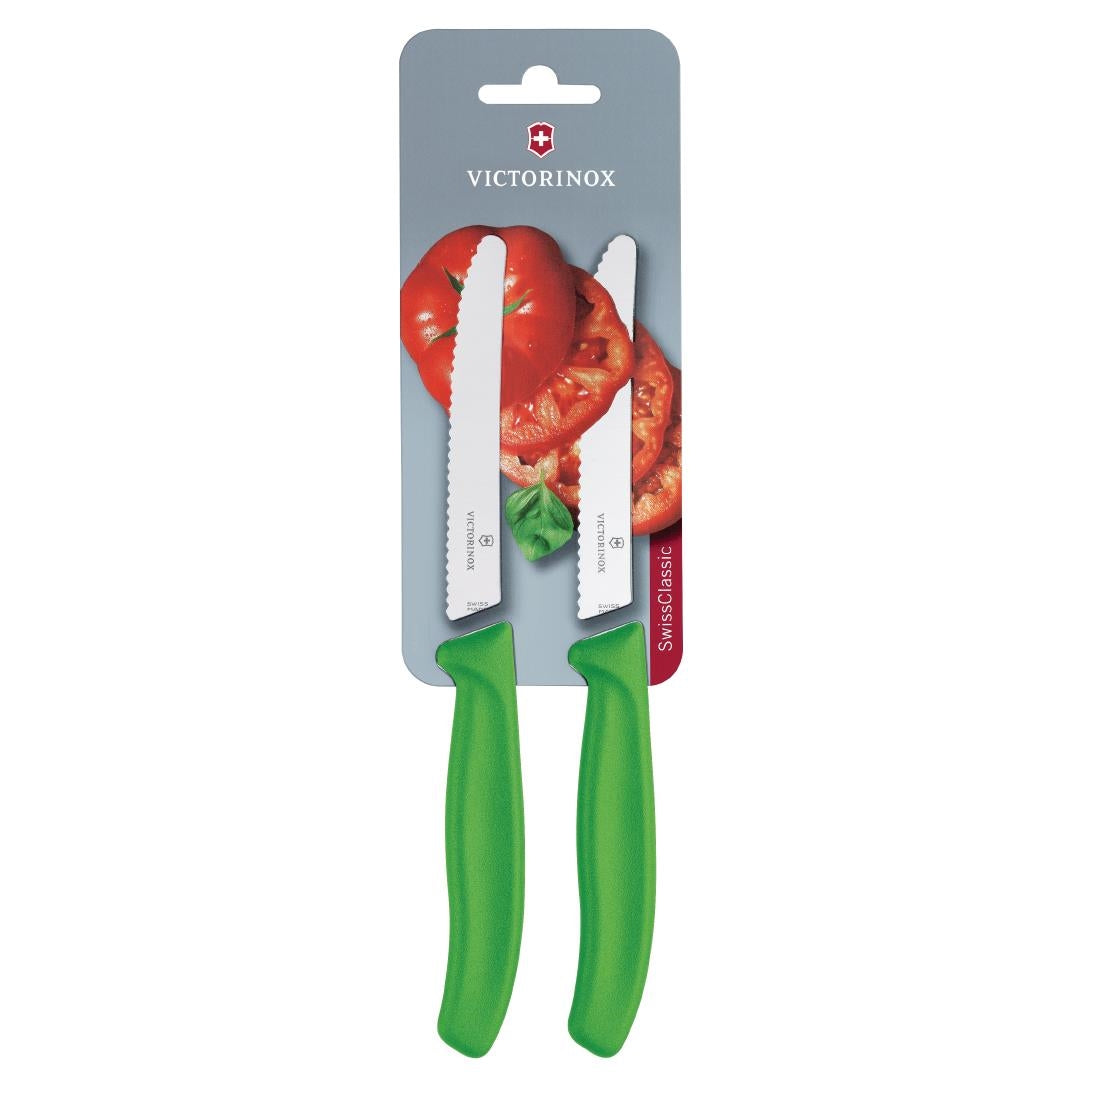 CU554 Victorinox Serrated Tomato/Utility Knife 11cm Green (Pack of 2) JD Catering Equipment Solutions Ltd